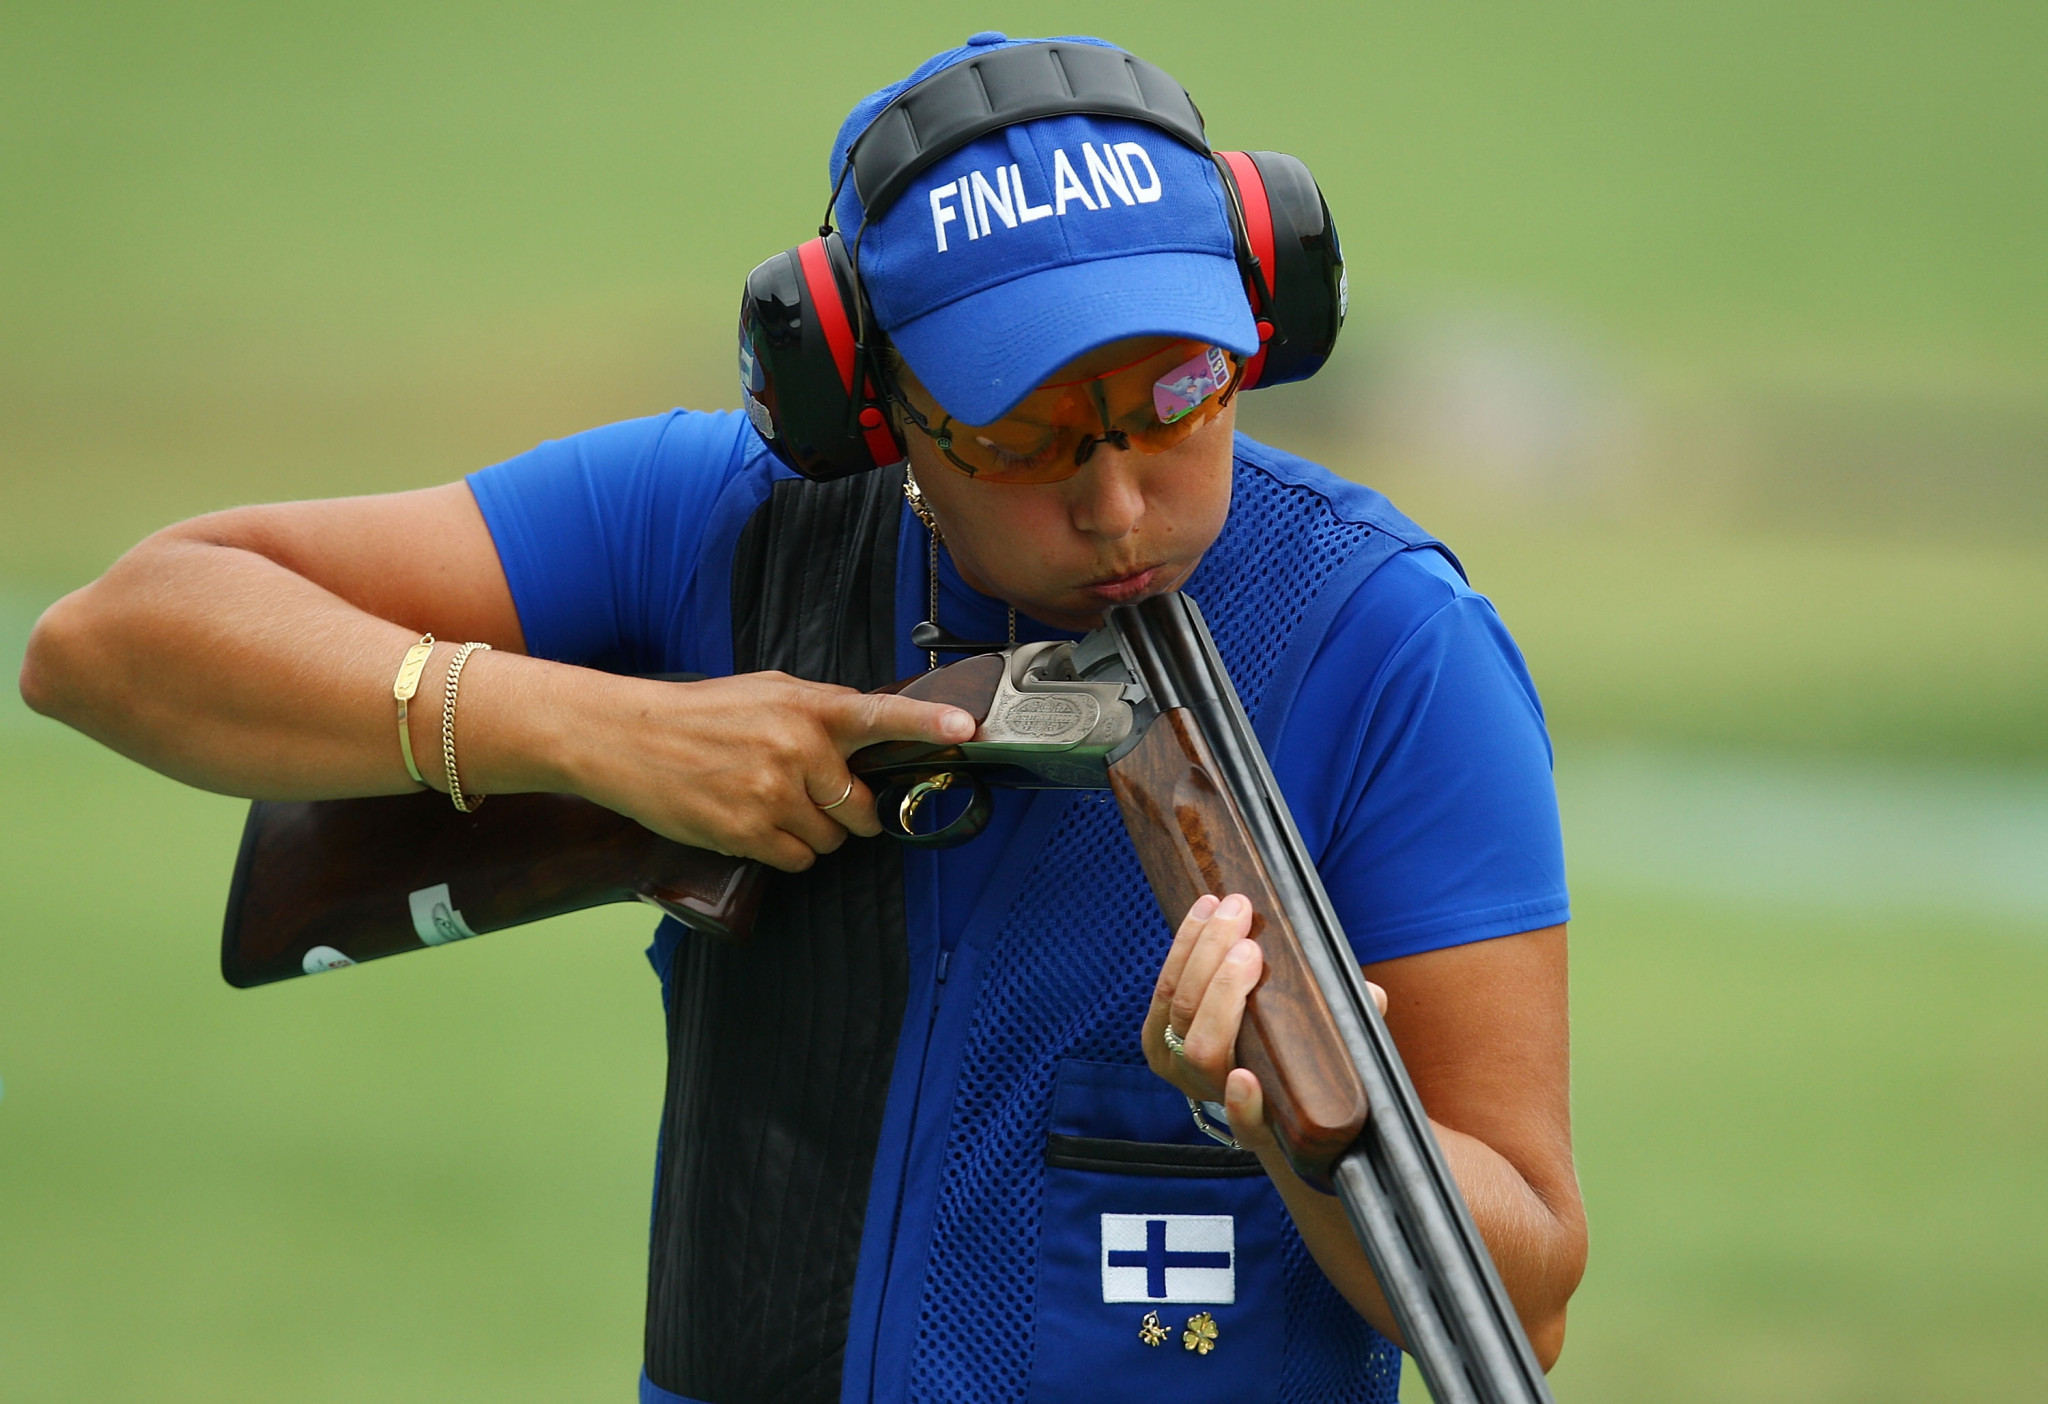 Finland's world record holder Satu Makela-Nummela only qualified in 27th place for tomorrow's Women's Trap final in the ISSF Shotgun World Cup in Al Ain ©Getty Images